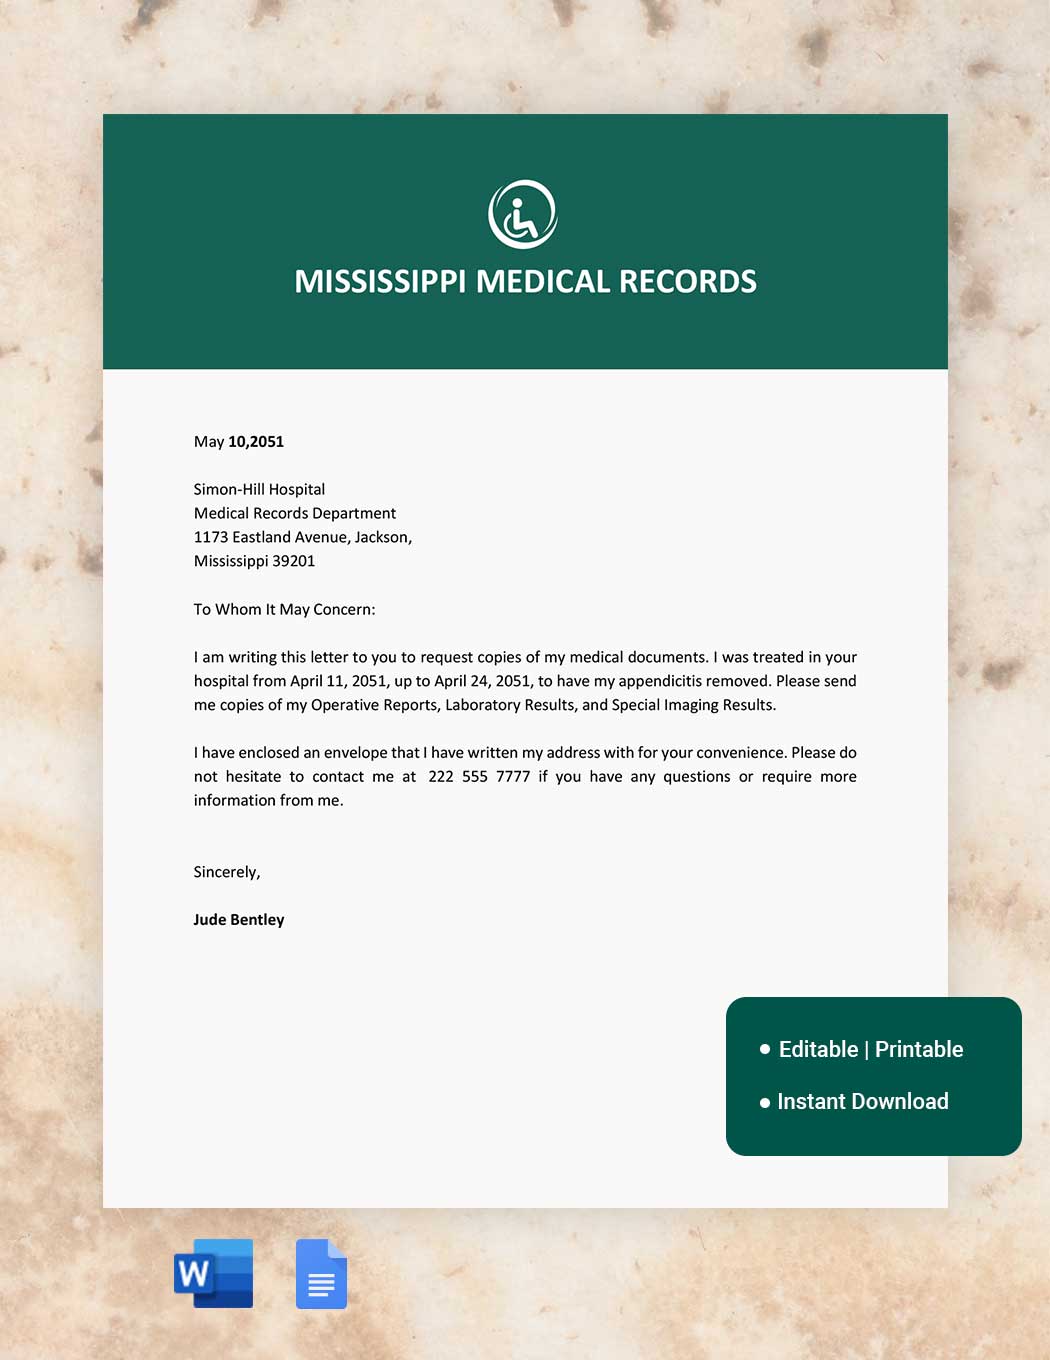 Mississippi Medical Records Request Template in Word, Google Docs